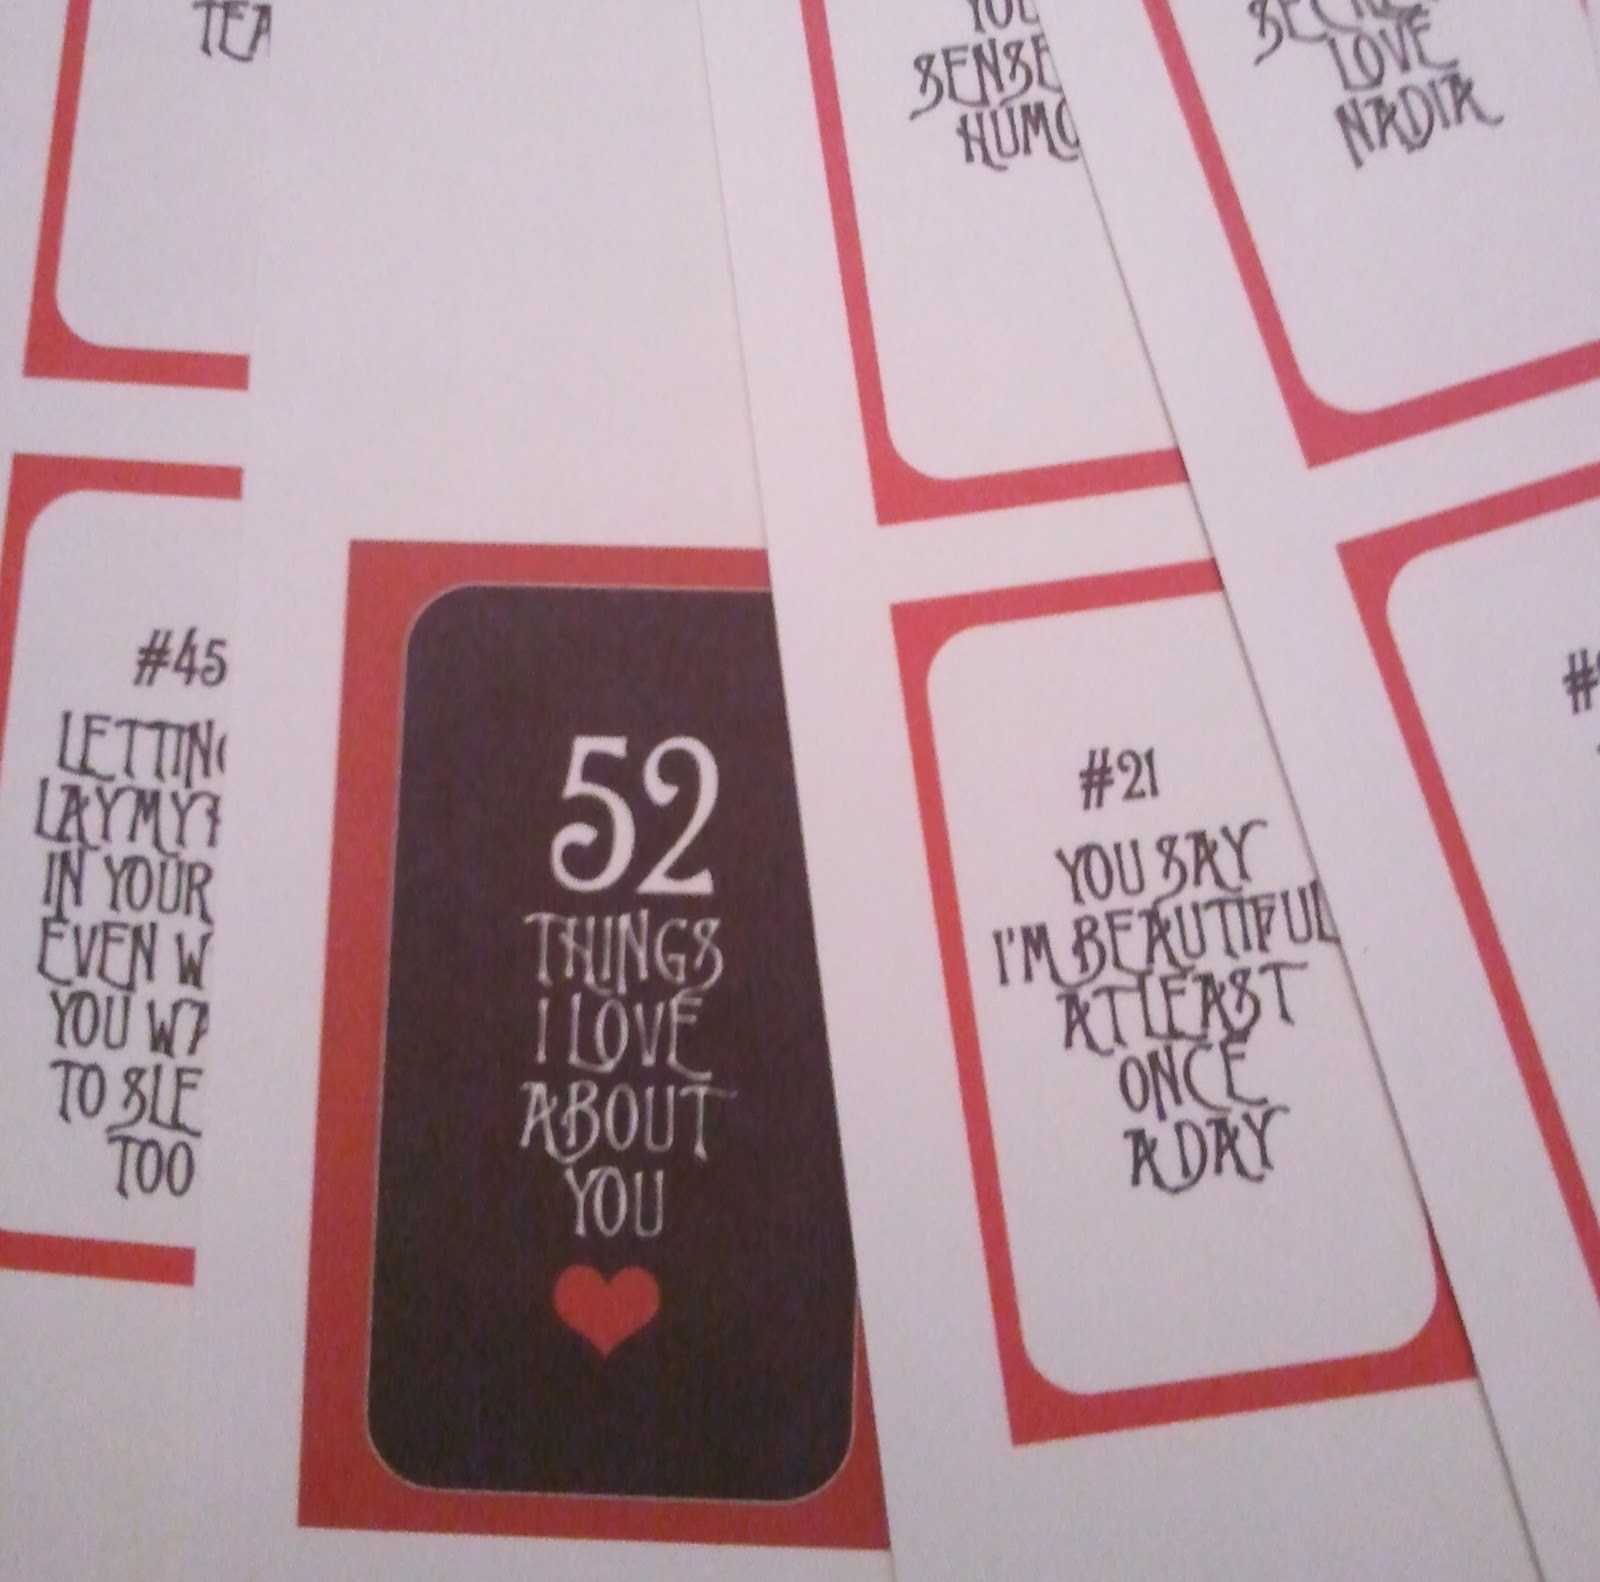 Becca Creative: 52 Reasons I Love You. Get Started On Intended For 52 Reasons Why I Love You Cards Templates Free